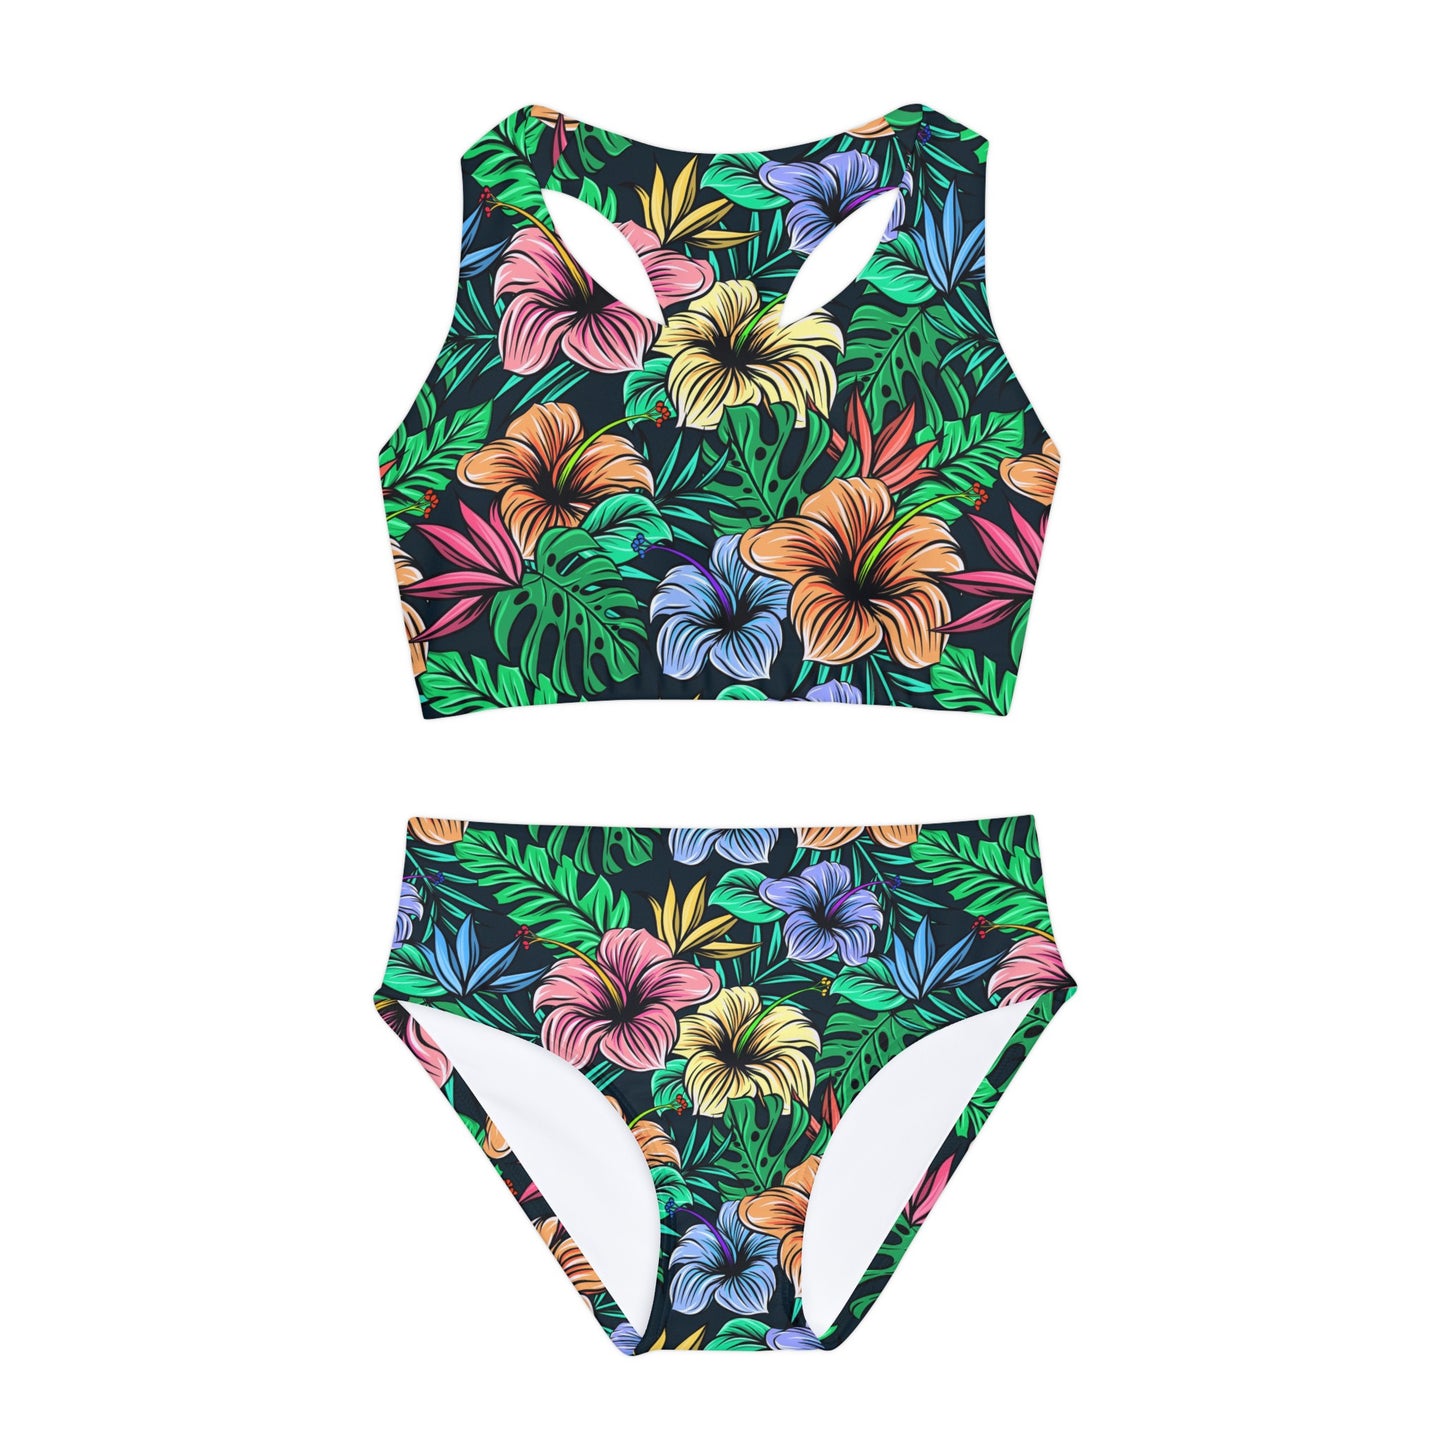 Hibiscus Dream - Girls Two-Piece Swimsuit